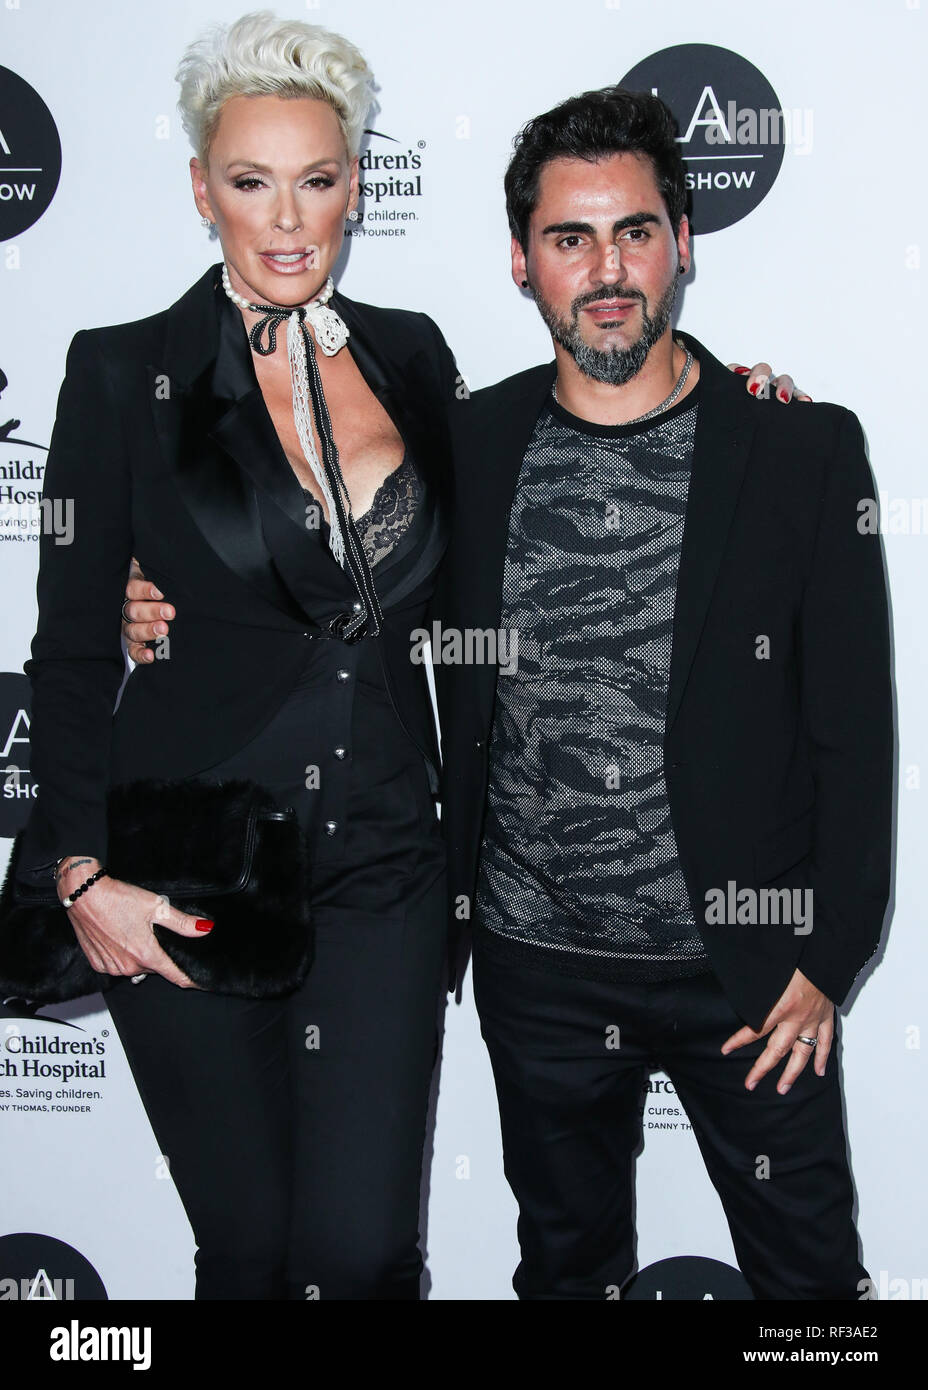 Los Angeles, California, USA. 23rd January, 2019. Actress Brigitte Nielsen and husband Mattia Dessi arrive at the Los Angeles Art Show 2019 Opening Night Gala held at the Los Angeles Convention Center on January 23, 2019 in Los Angeles, California, United States. (Photo by Xavier Collin/Image Press Agency) Credit: Image Press Agency/Alamy Live News Stock Photo